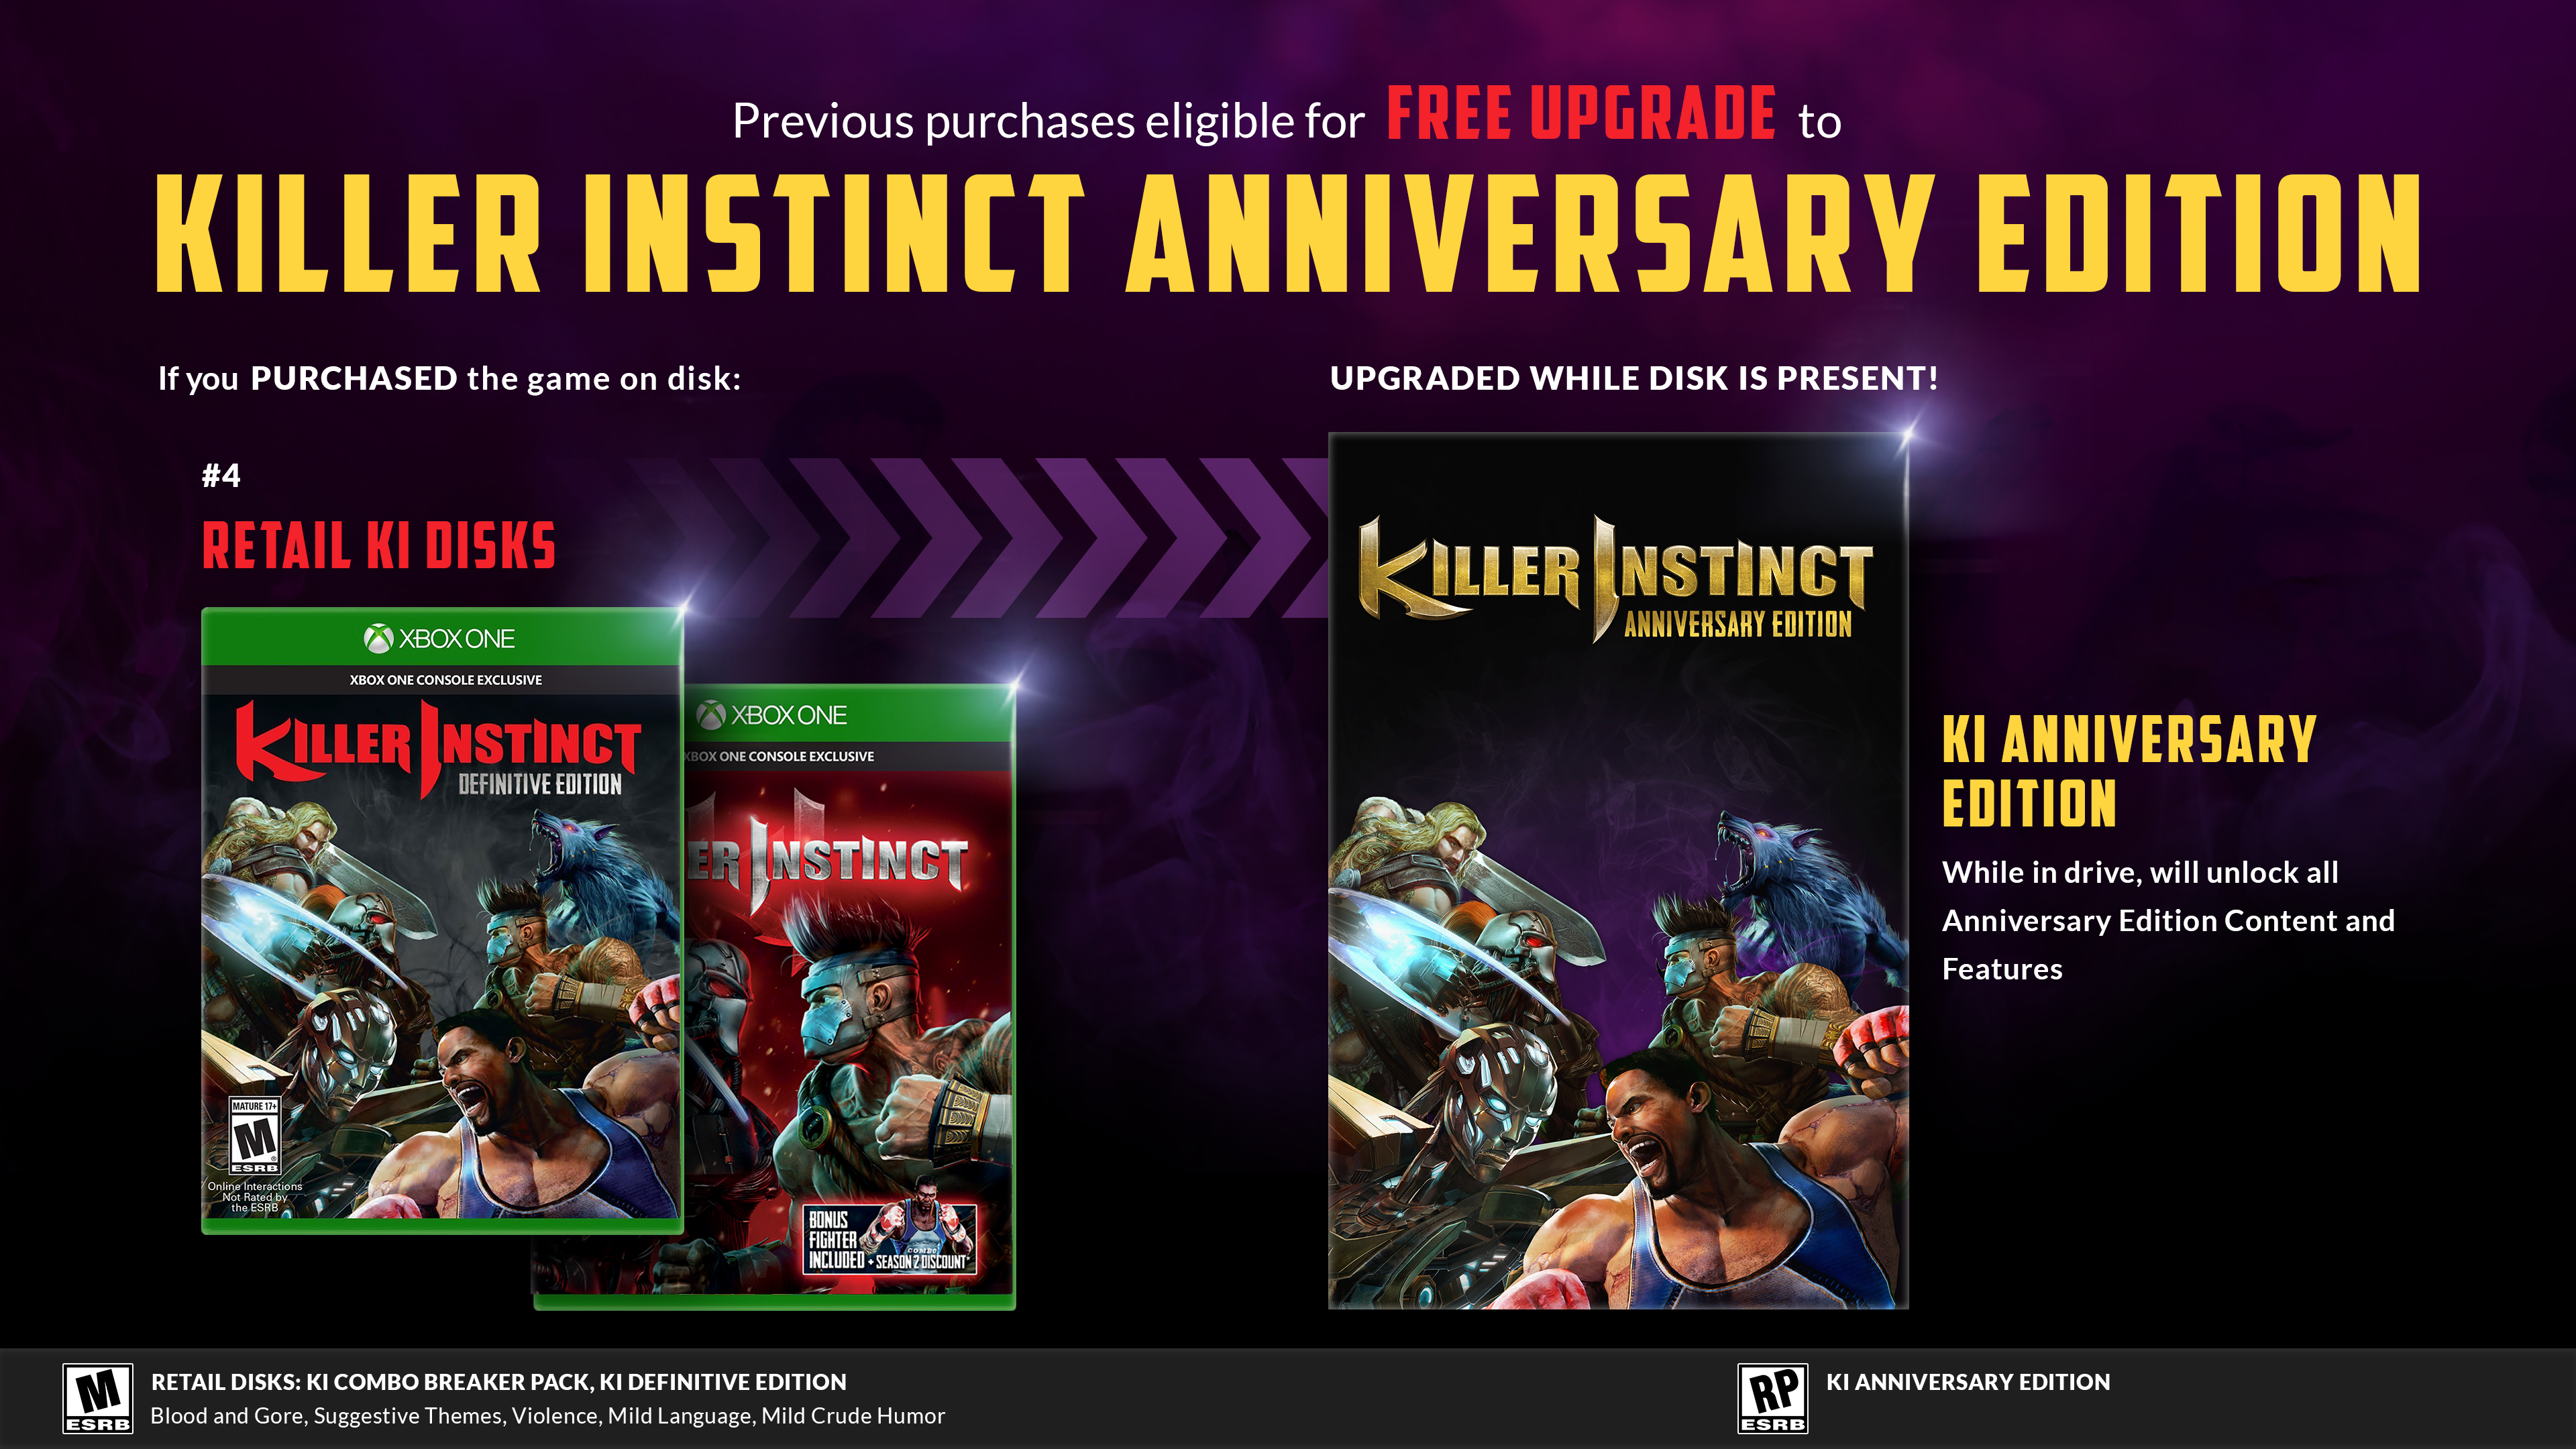 Previous purchases eligible for FREE UPGRADE to Killer Instinct Anniversary Edition If you purchased the game on disk: #4: Retail KI Disks >>> Upgraded while disk is present! When in drive, will unlock all Anniversary Edition Content and Features ESRB Rated M for Mature: Retail Disks: KI Combo Breaker Pack, KI Definitive Edition: Blood and Gore, Suggestive Themes, Violence, Mild Language, Crude Humor ESRB Rated RP for Rating Pending: KI Anniversary Edition